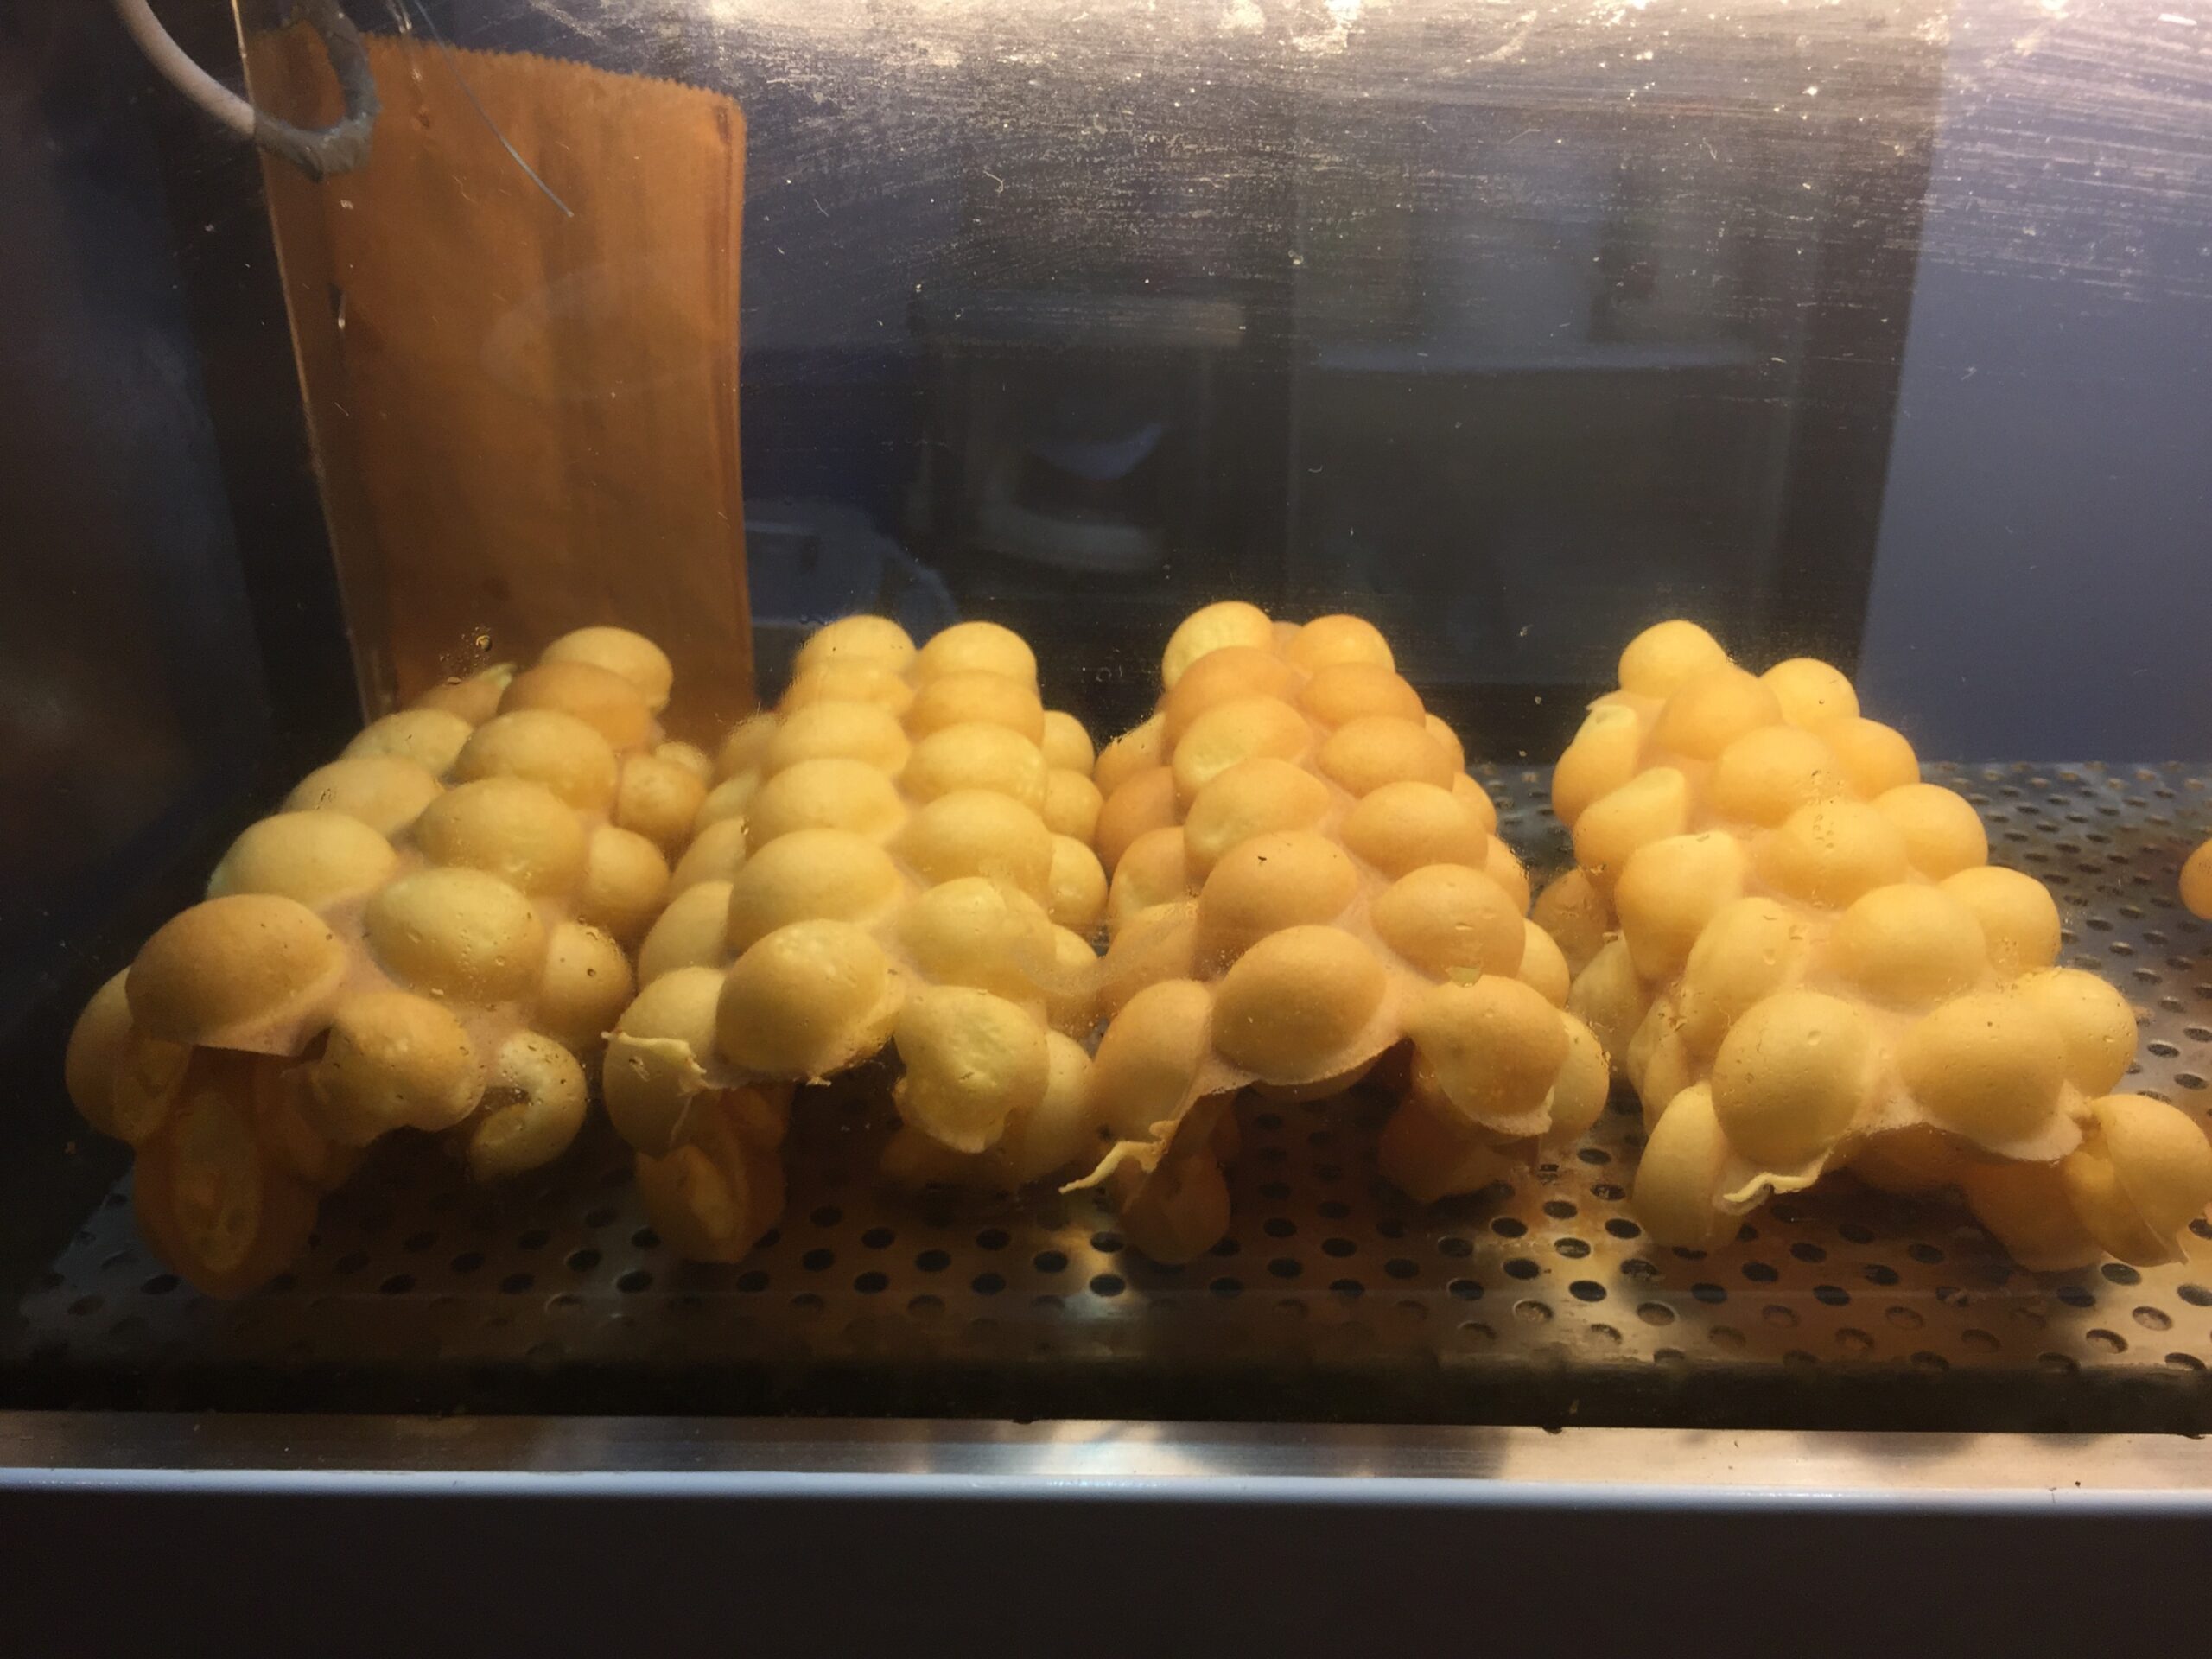 Tasty egg waffles are a snack found at most street food vendors in Hong Kong.